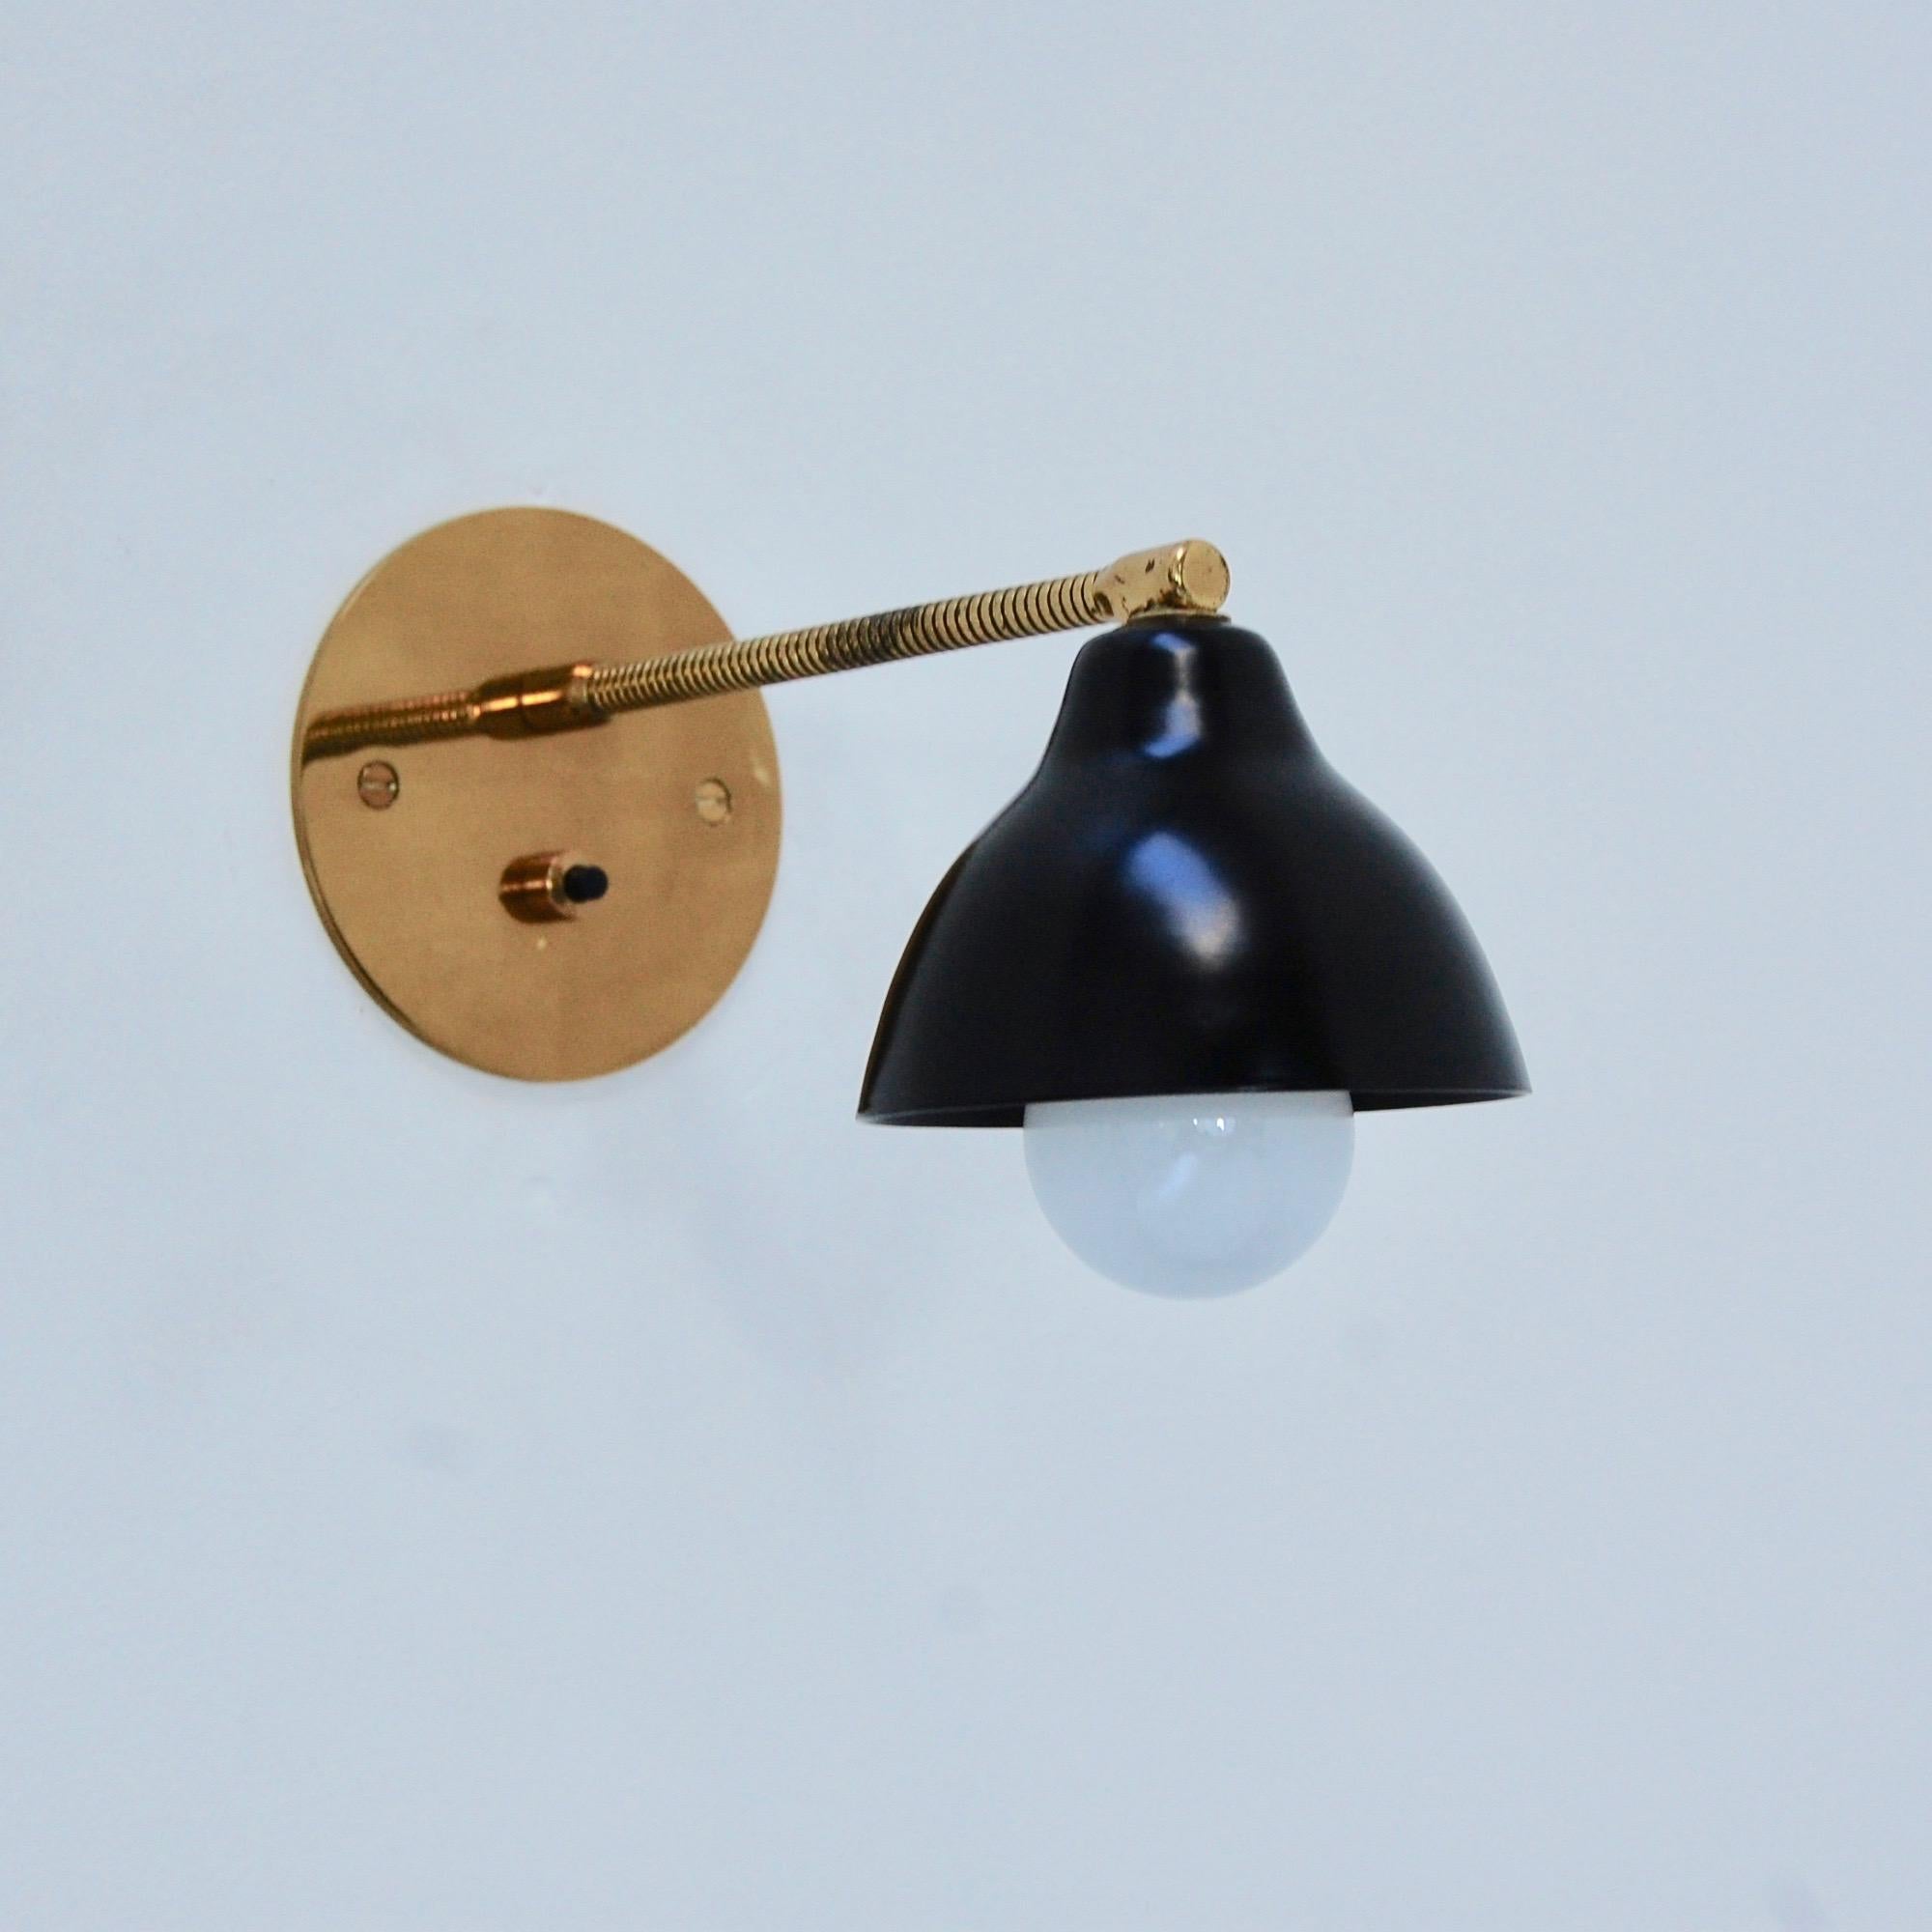 Pair of Mid-Century Modern petite Italian gooseneck sconce reading lights from Italy. Partially restored, patina lacquered brass, and black powder-coated aluminum. Single E12 based socket per sconce. Maximum wattage 60 watts per sconce. Back plate